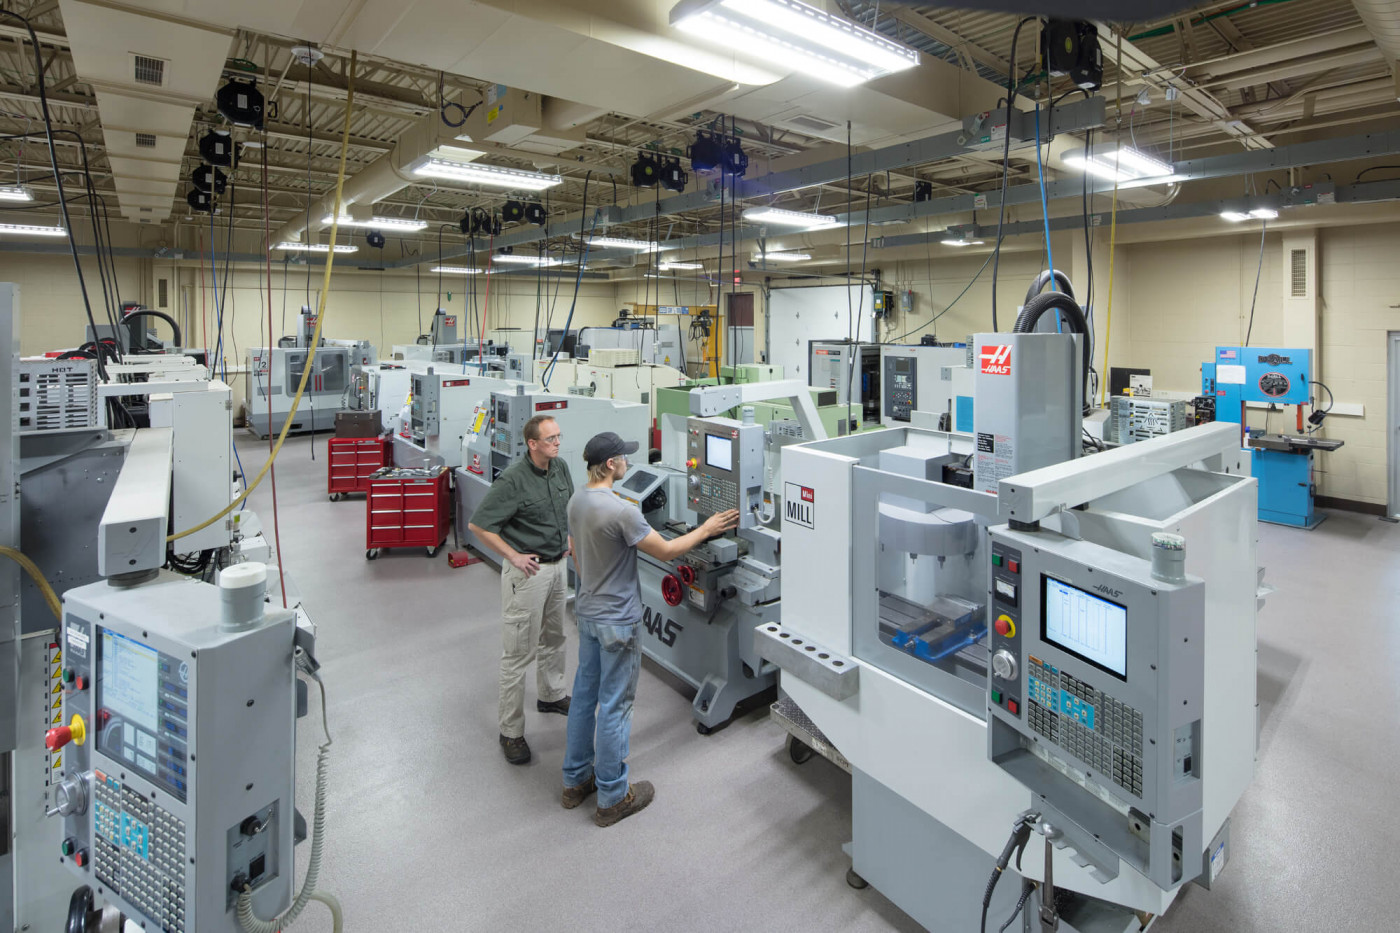 Wide angle view of machine shop